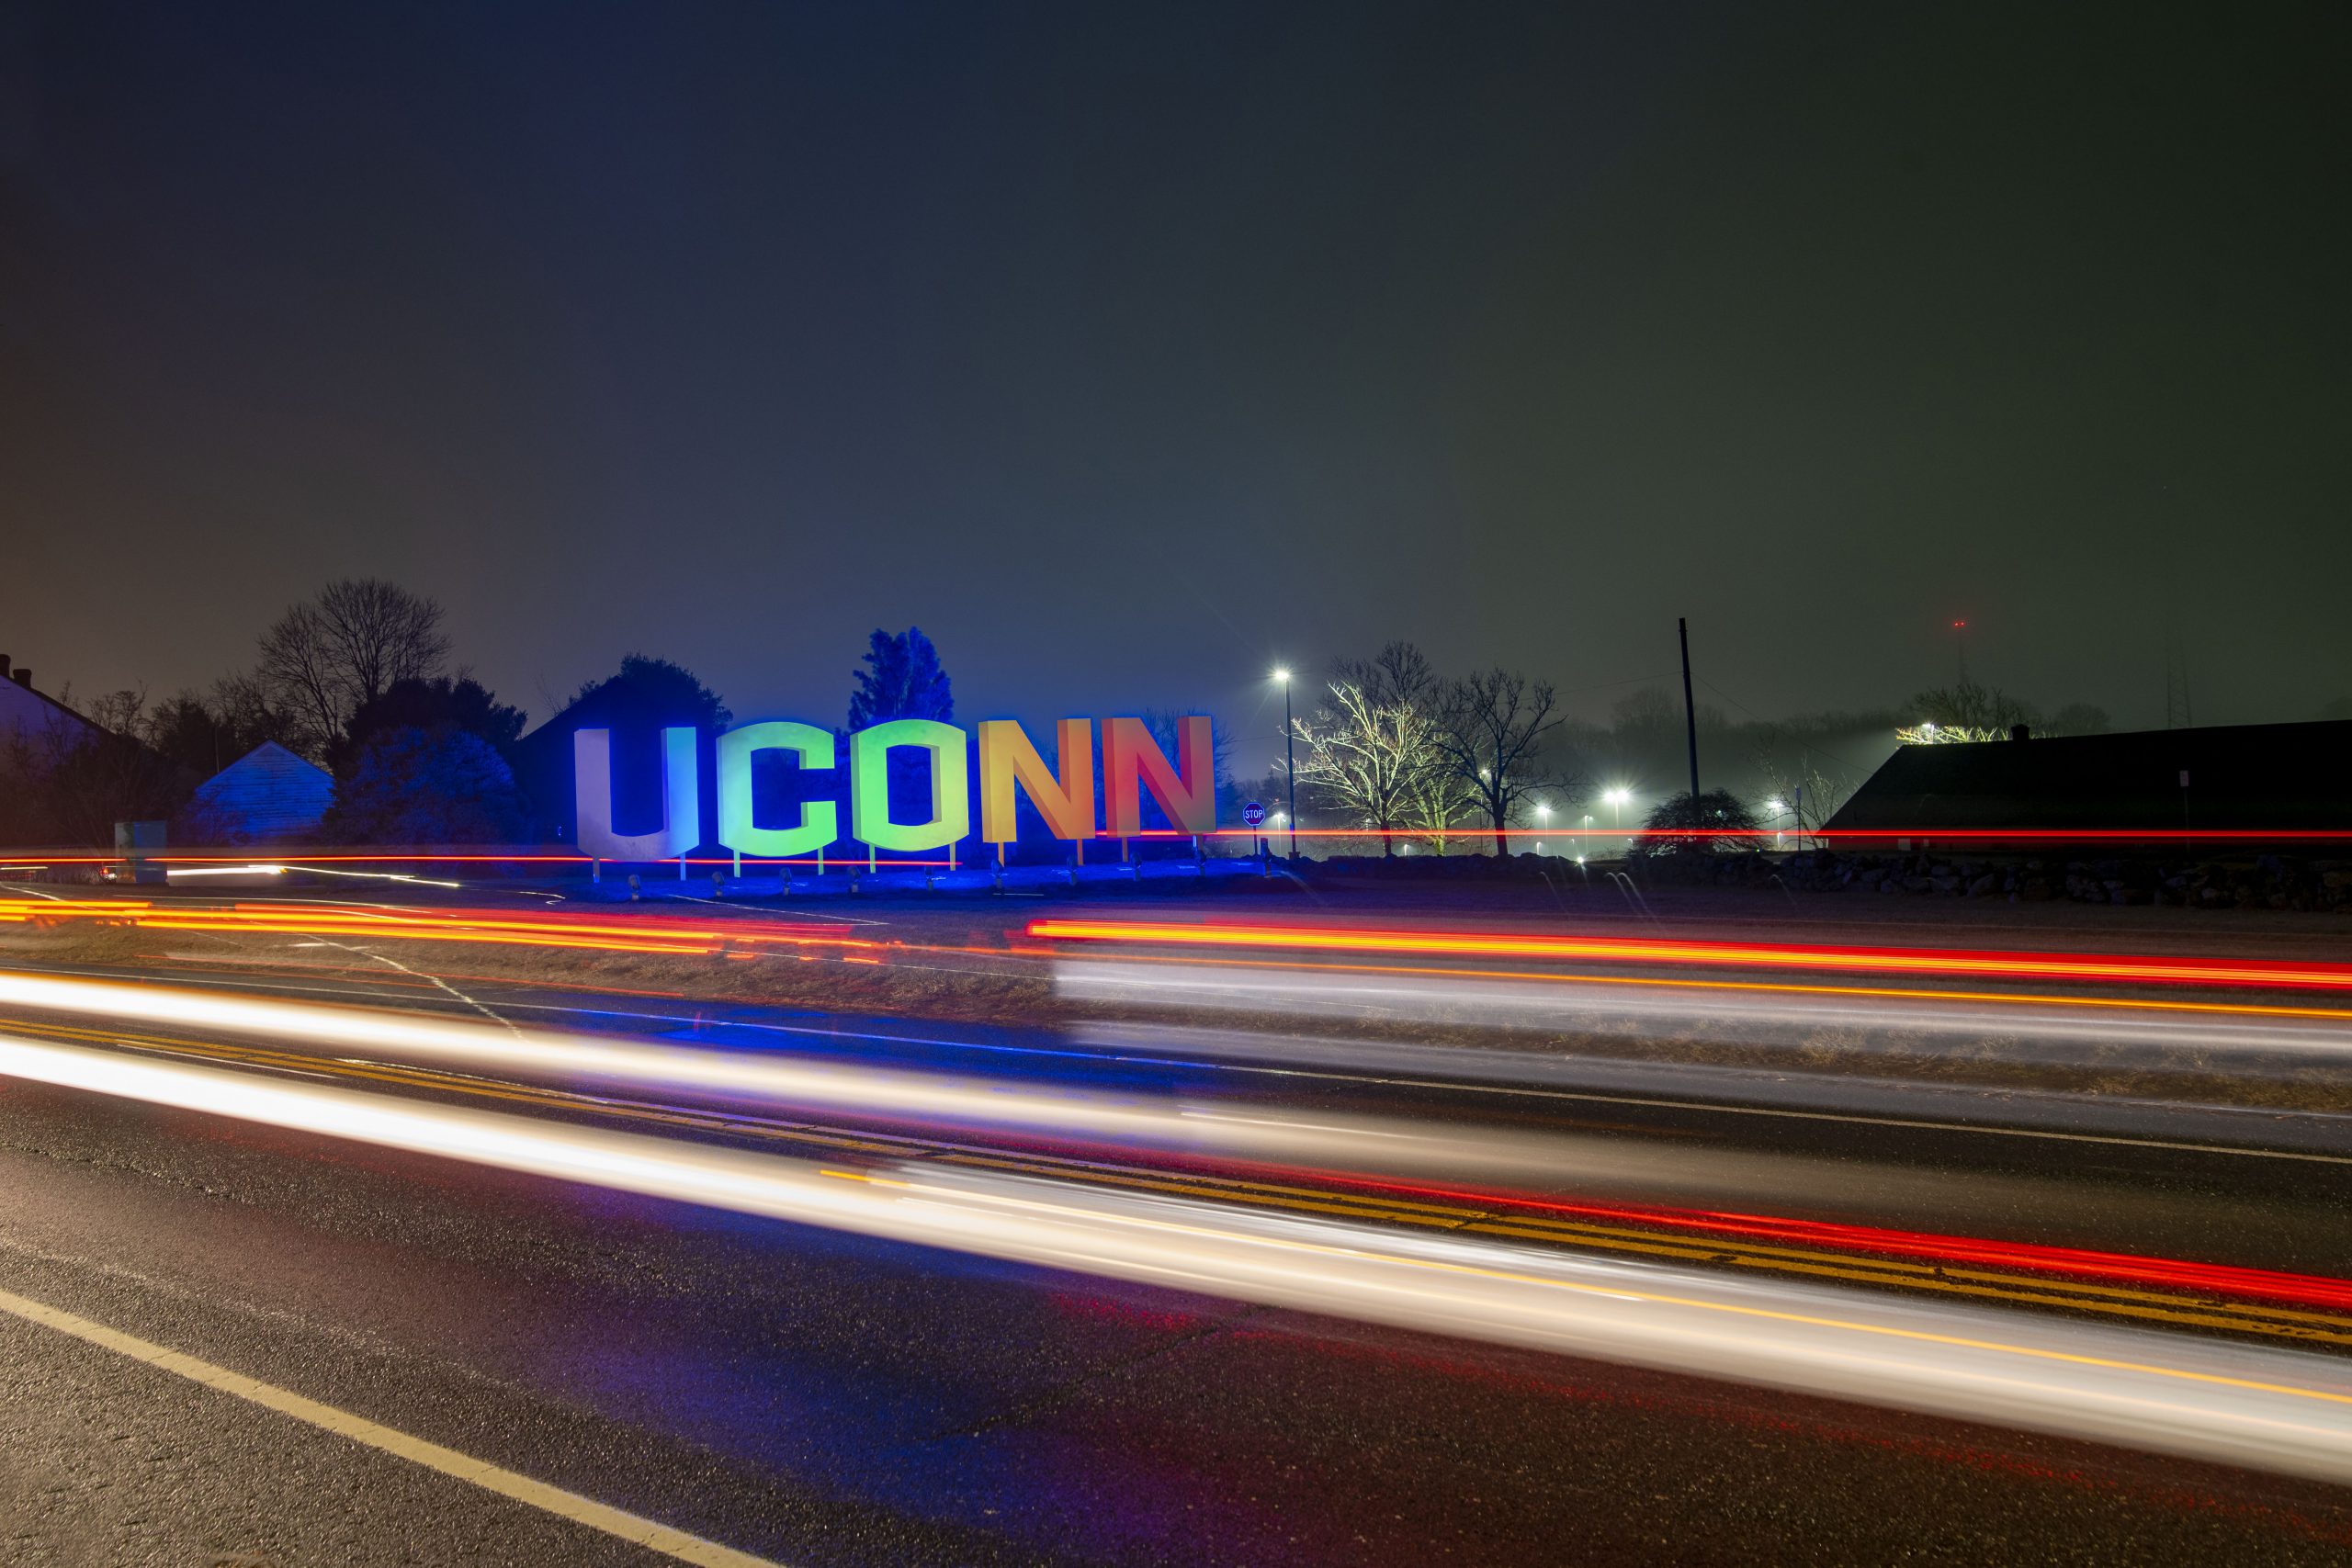 Large UConn sign lit up at night with light trails from car traffic. Feb. 6, 2020. (Sean Flynn/UConn Photo)